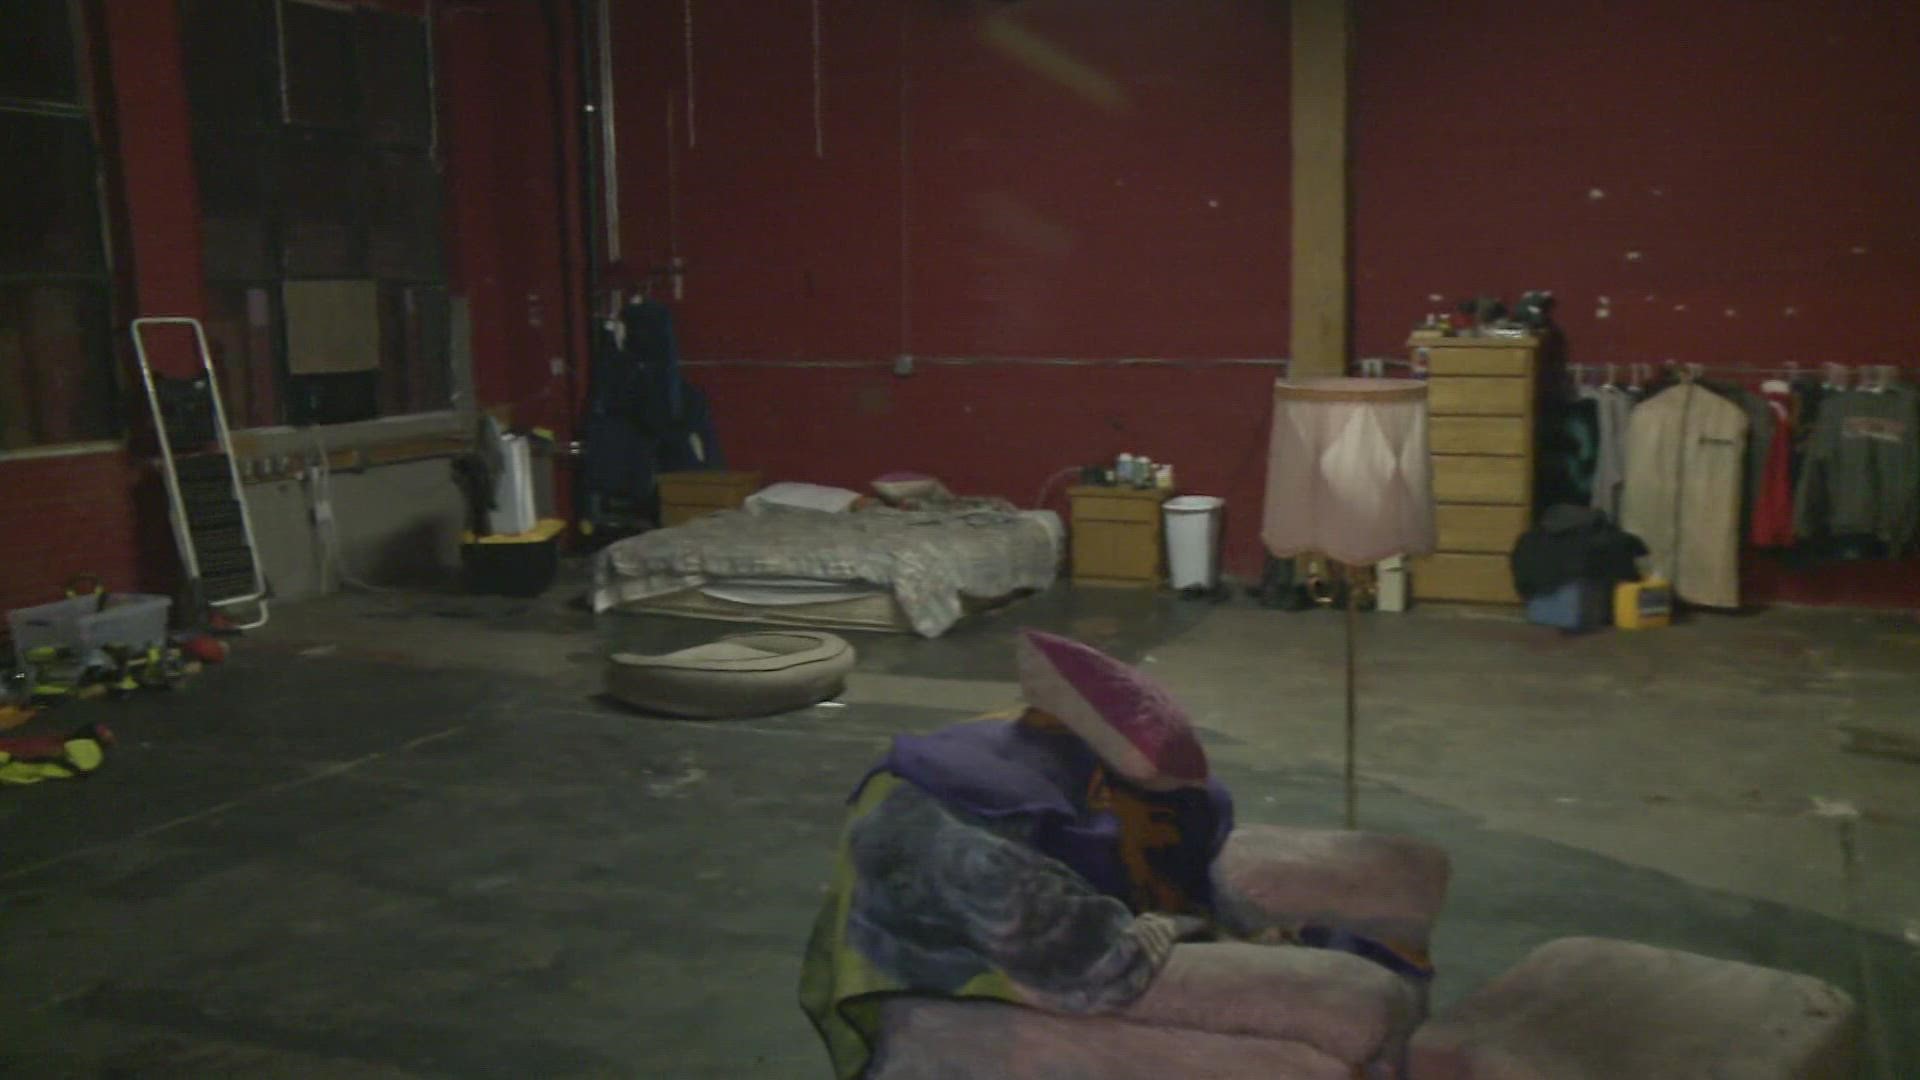 City code enforcement says the shelter failed to correct multiple safety violations.